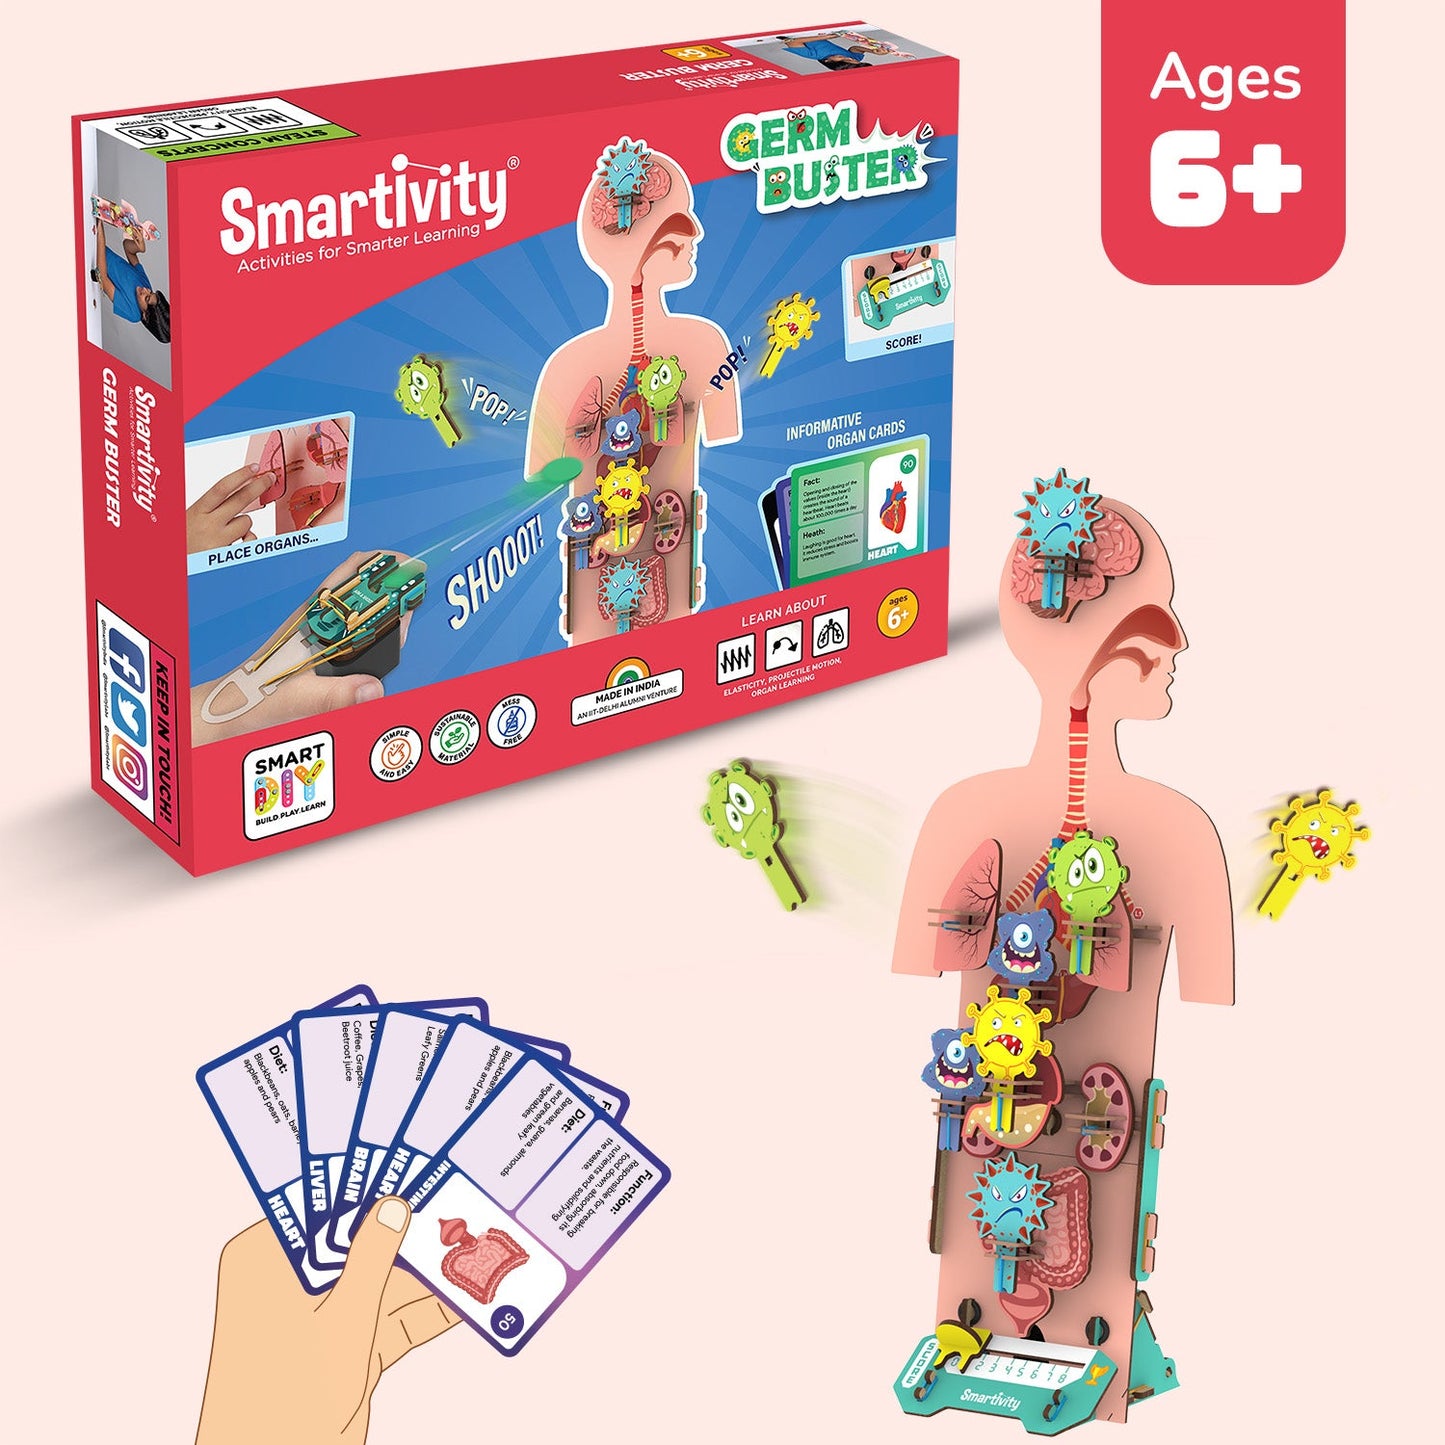 Germ Buster for 6+ years ❘ Boost motor skills and creativity ❘ Learn human anatomy and immune system - Smartivity